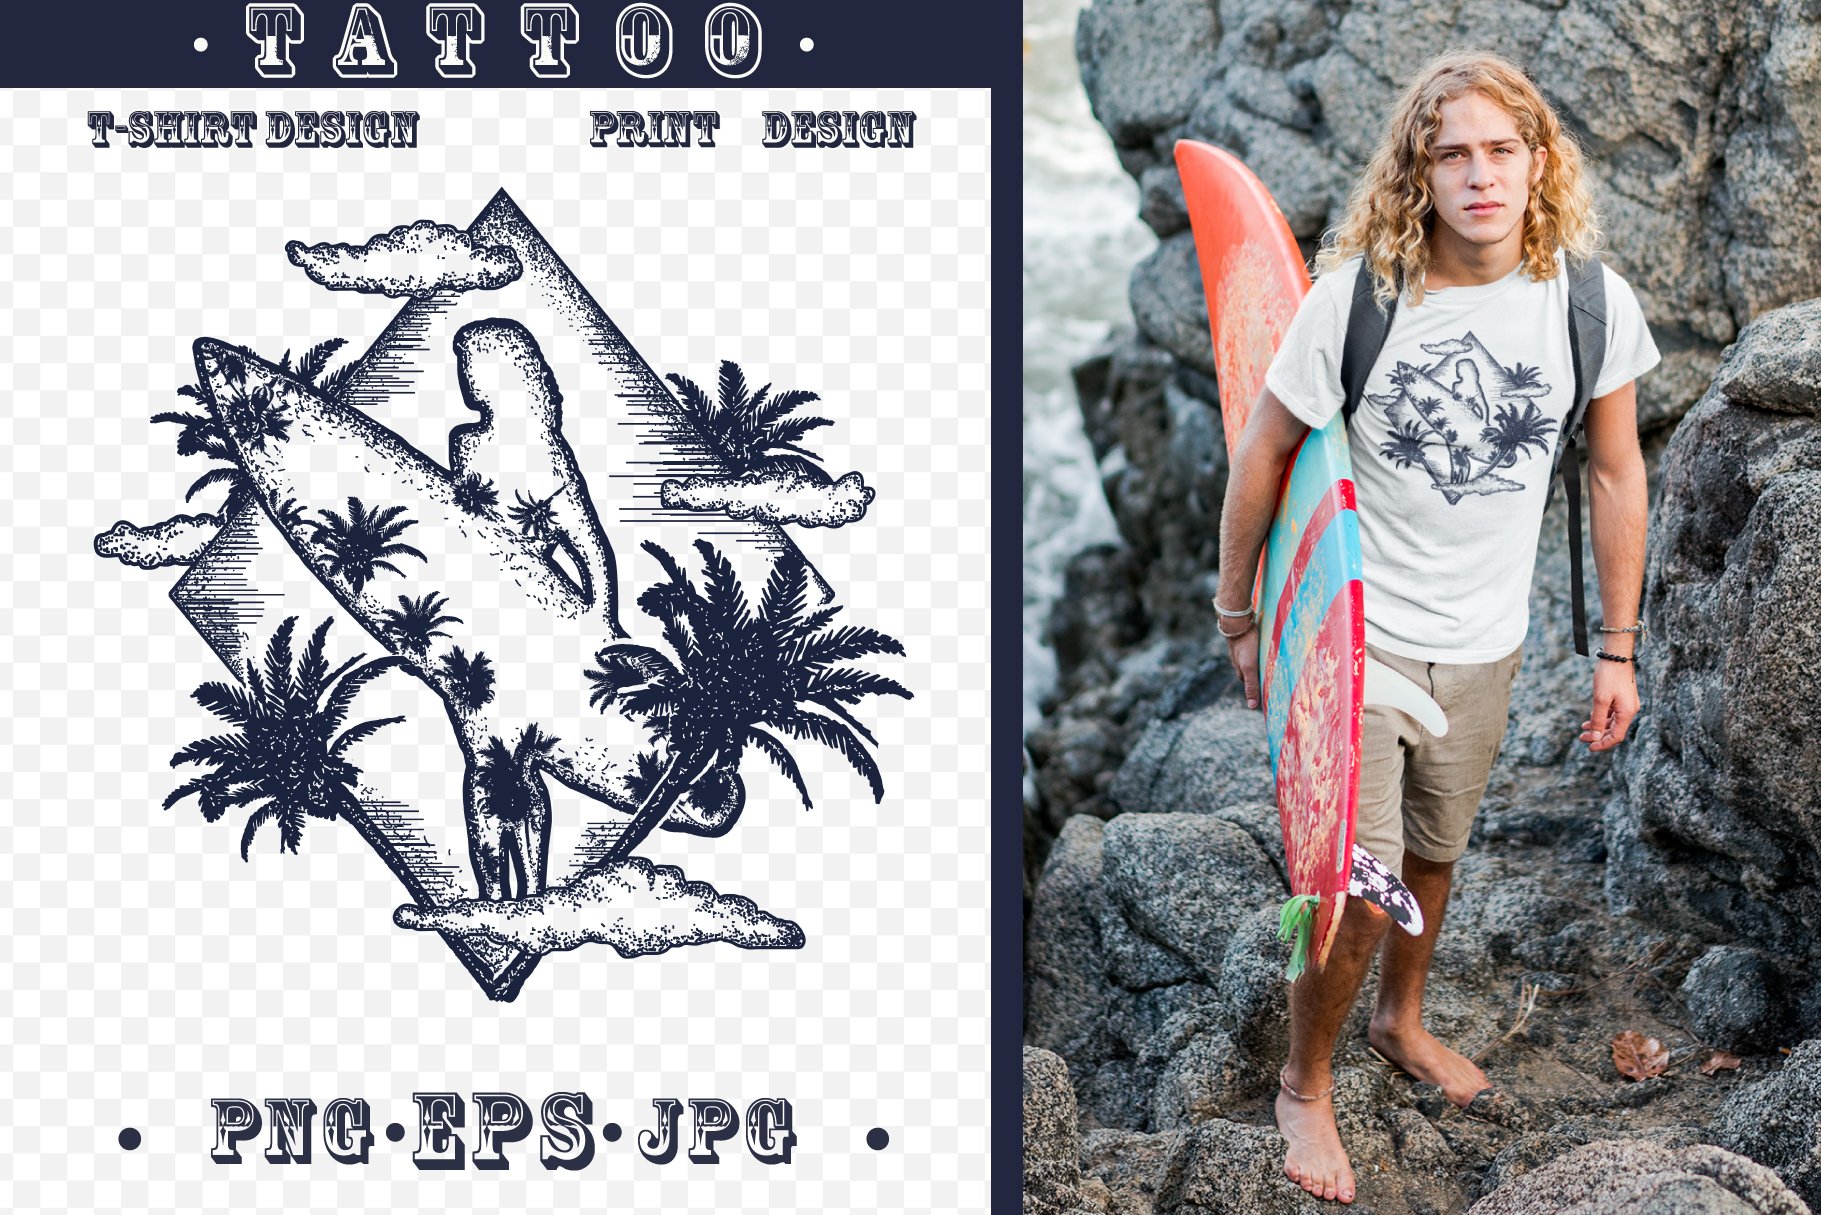 Surfing tattoo cover image.